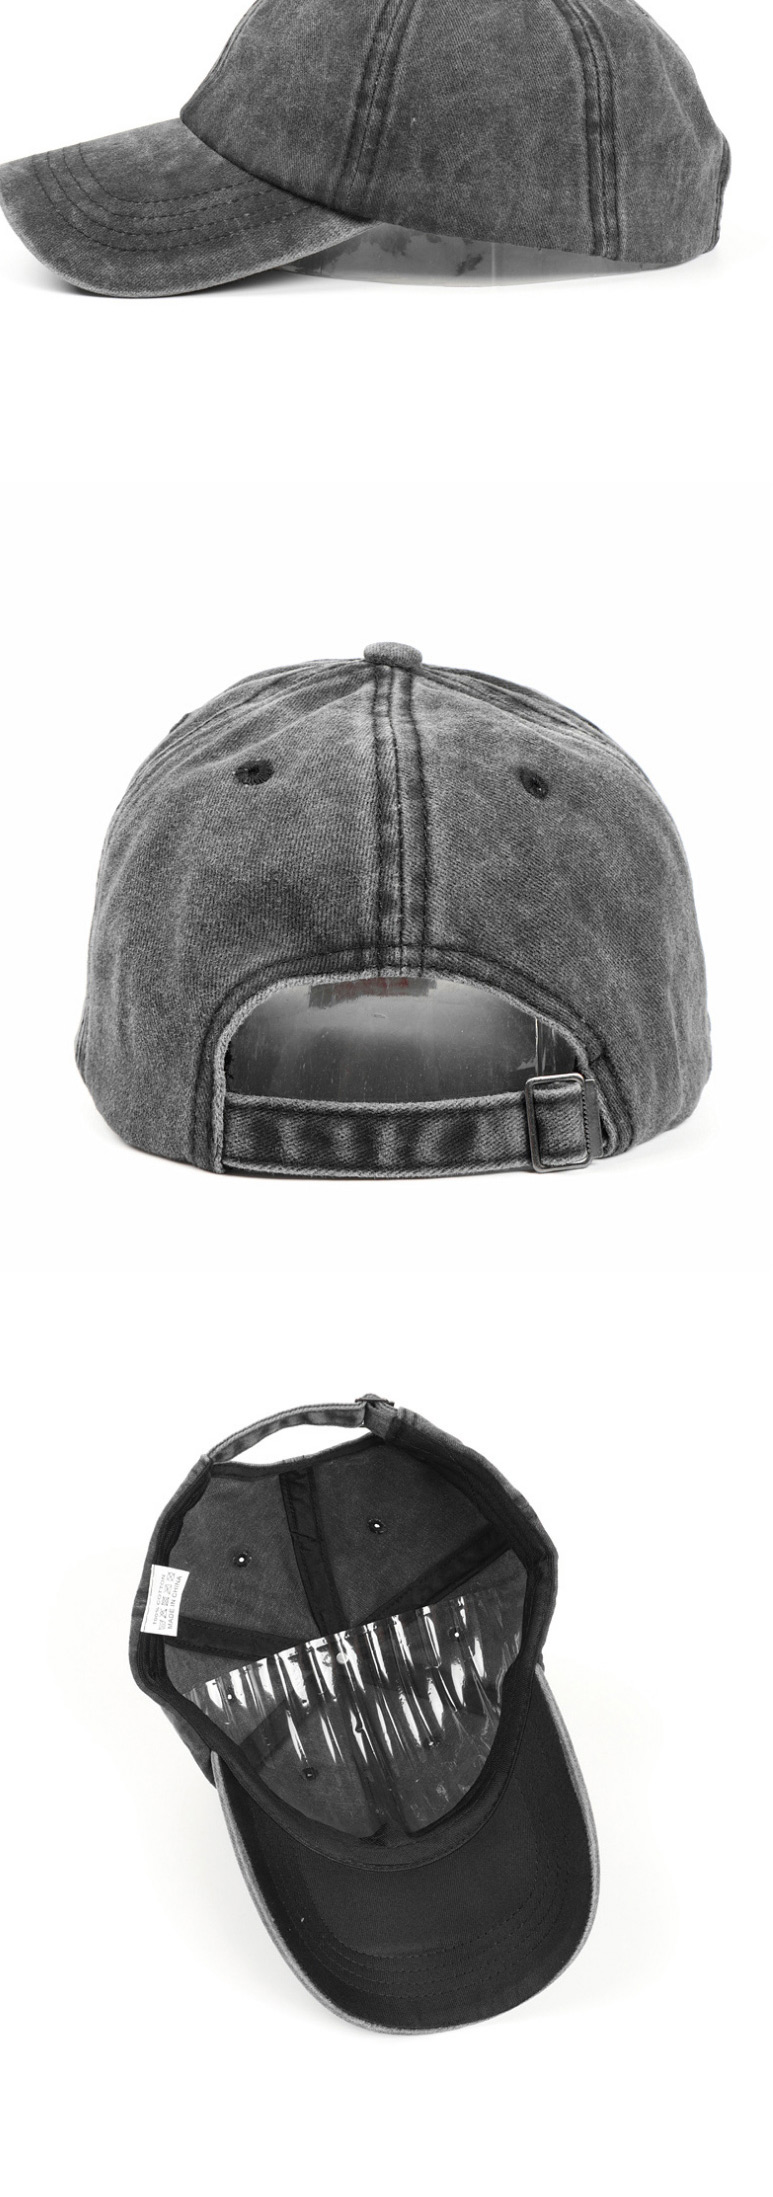 Fashion Black Gray Washed Distressed Denim Soft Top And Curved Brim Cap,Baseball Caps